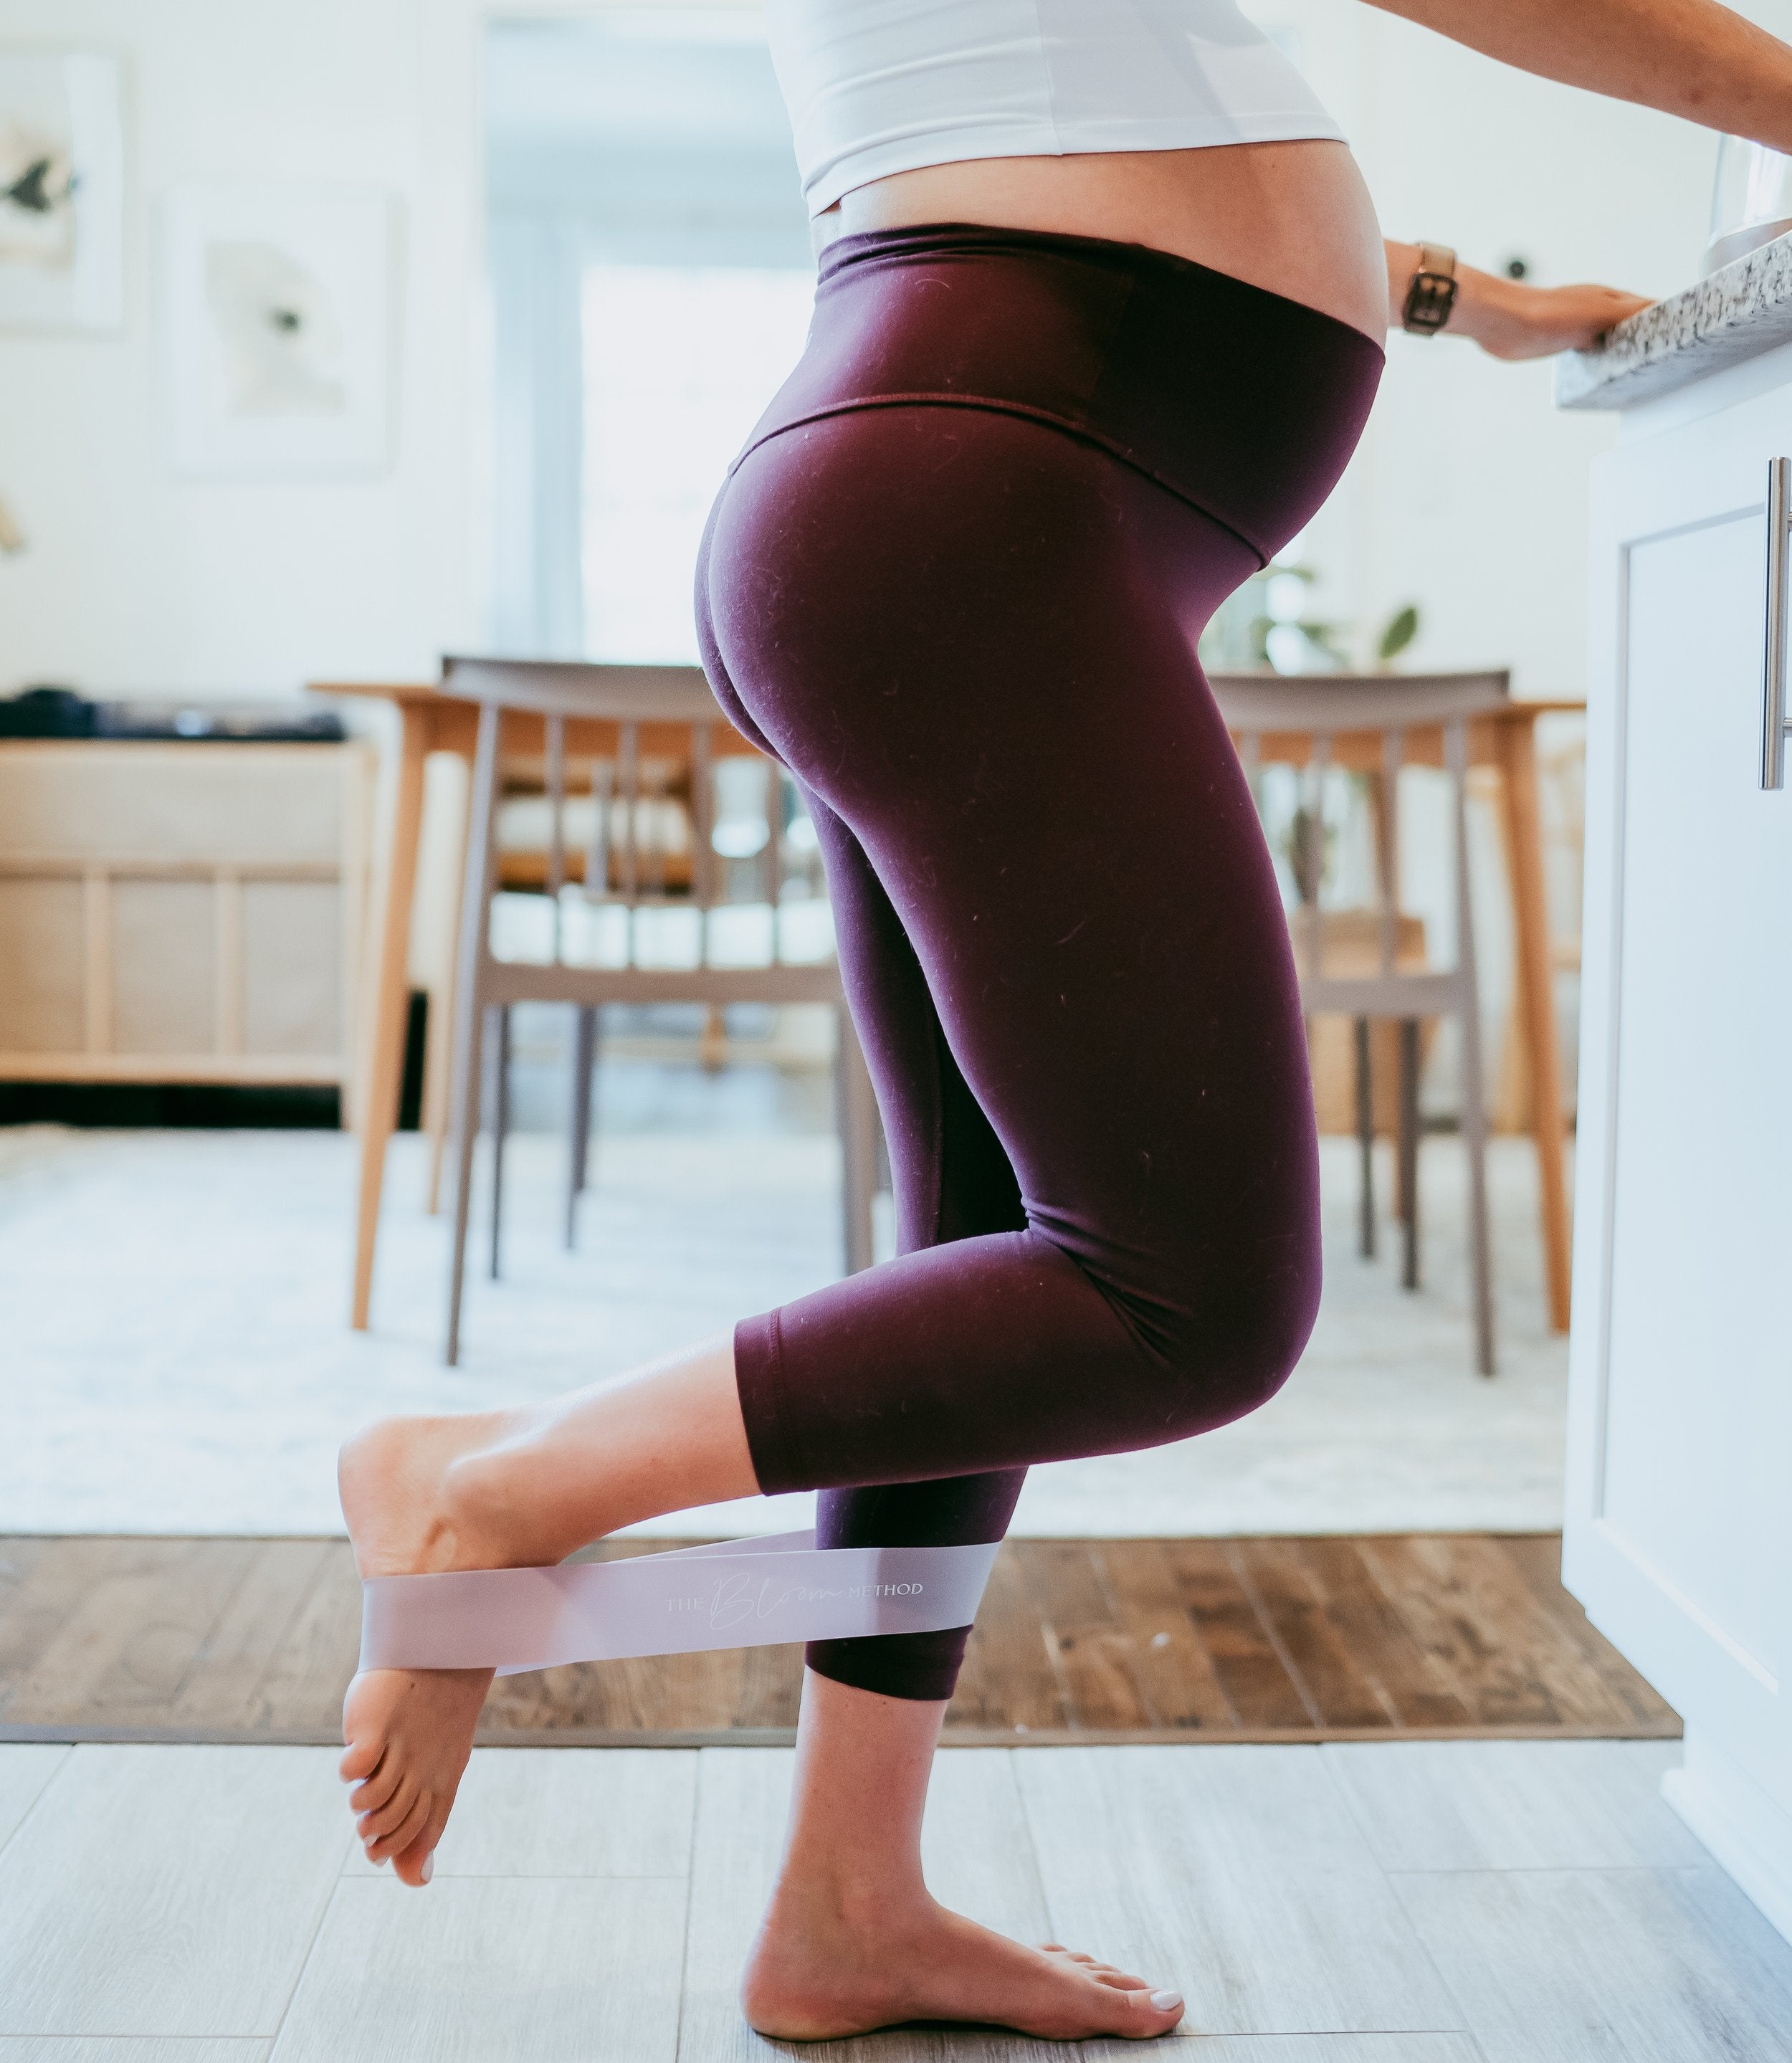 Postpartum Exercise: Guide to Working Out Post Pregnancy – Belly Bandit